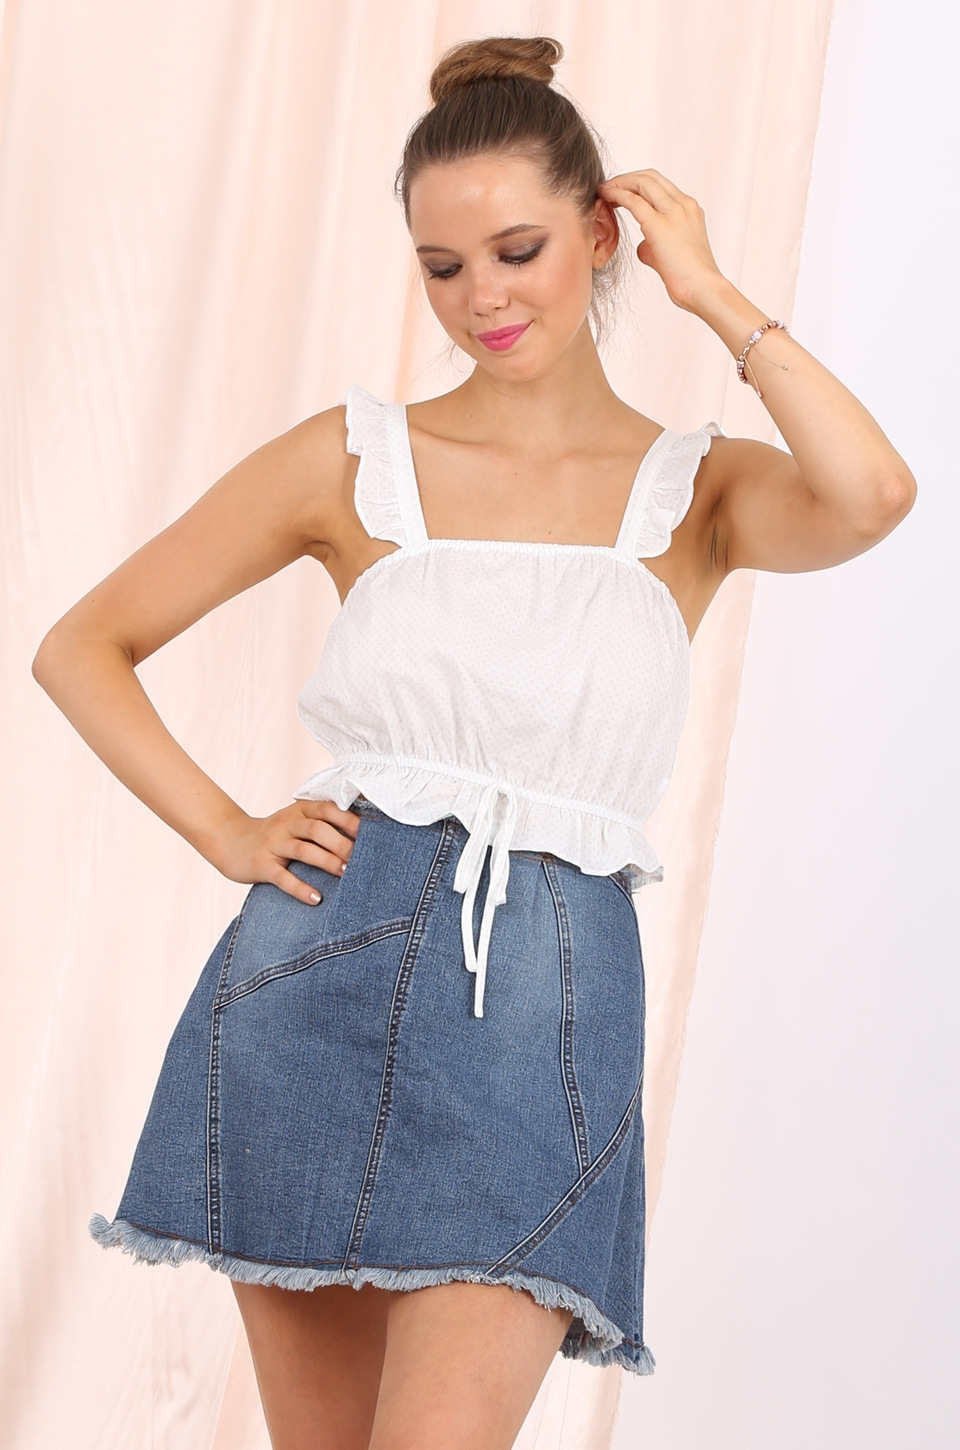 Mya cropped top in white